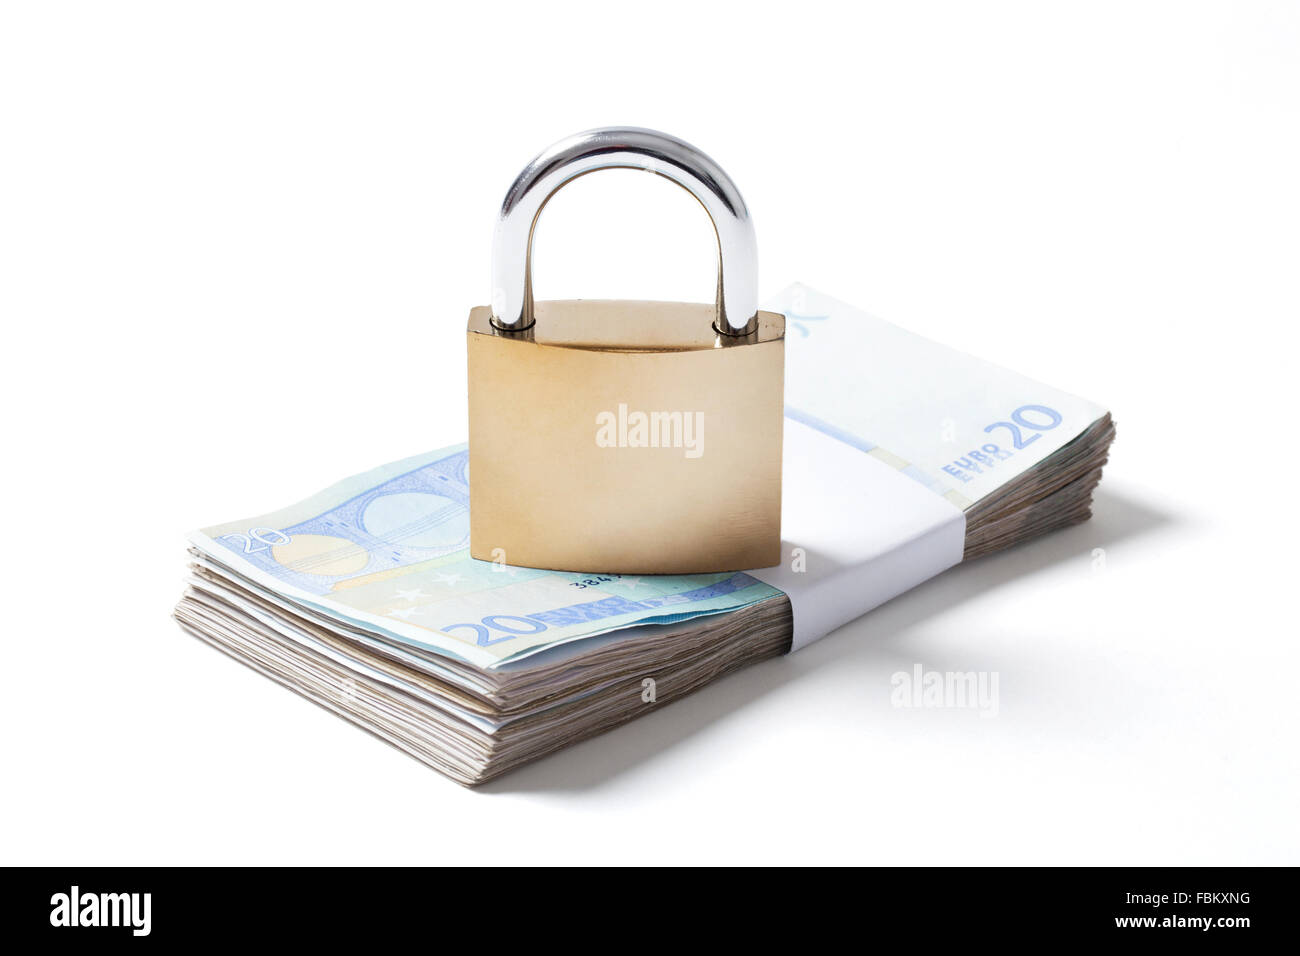 Wad of twenty euros banknotes with locked padlock on it isolated on white background. Image with a clipping path. Stock Photo